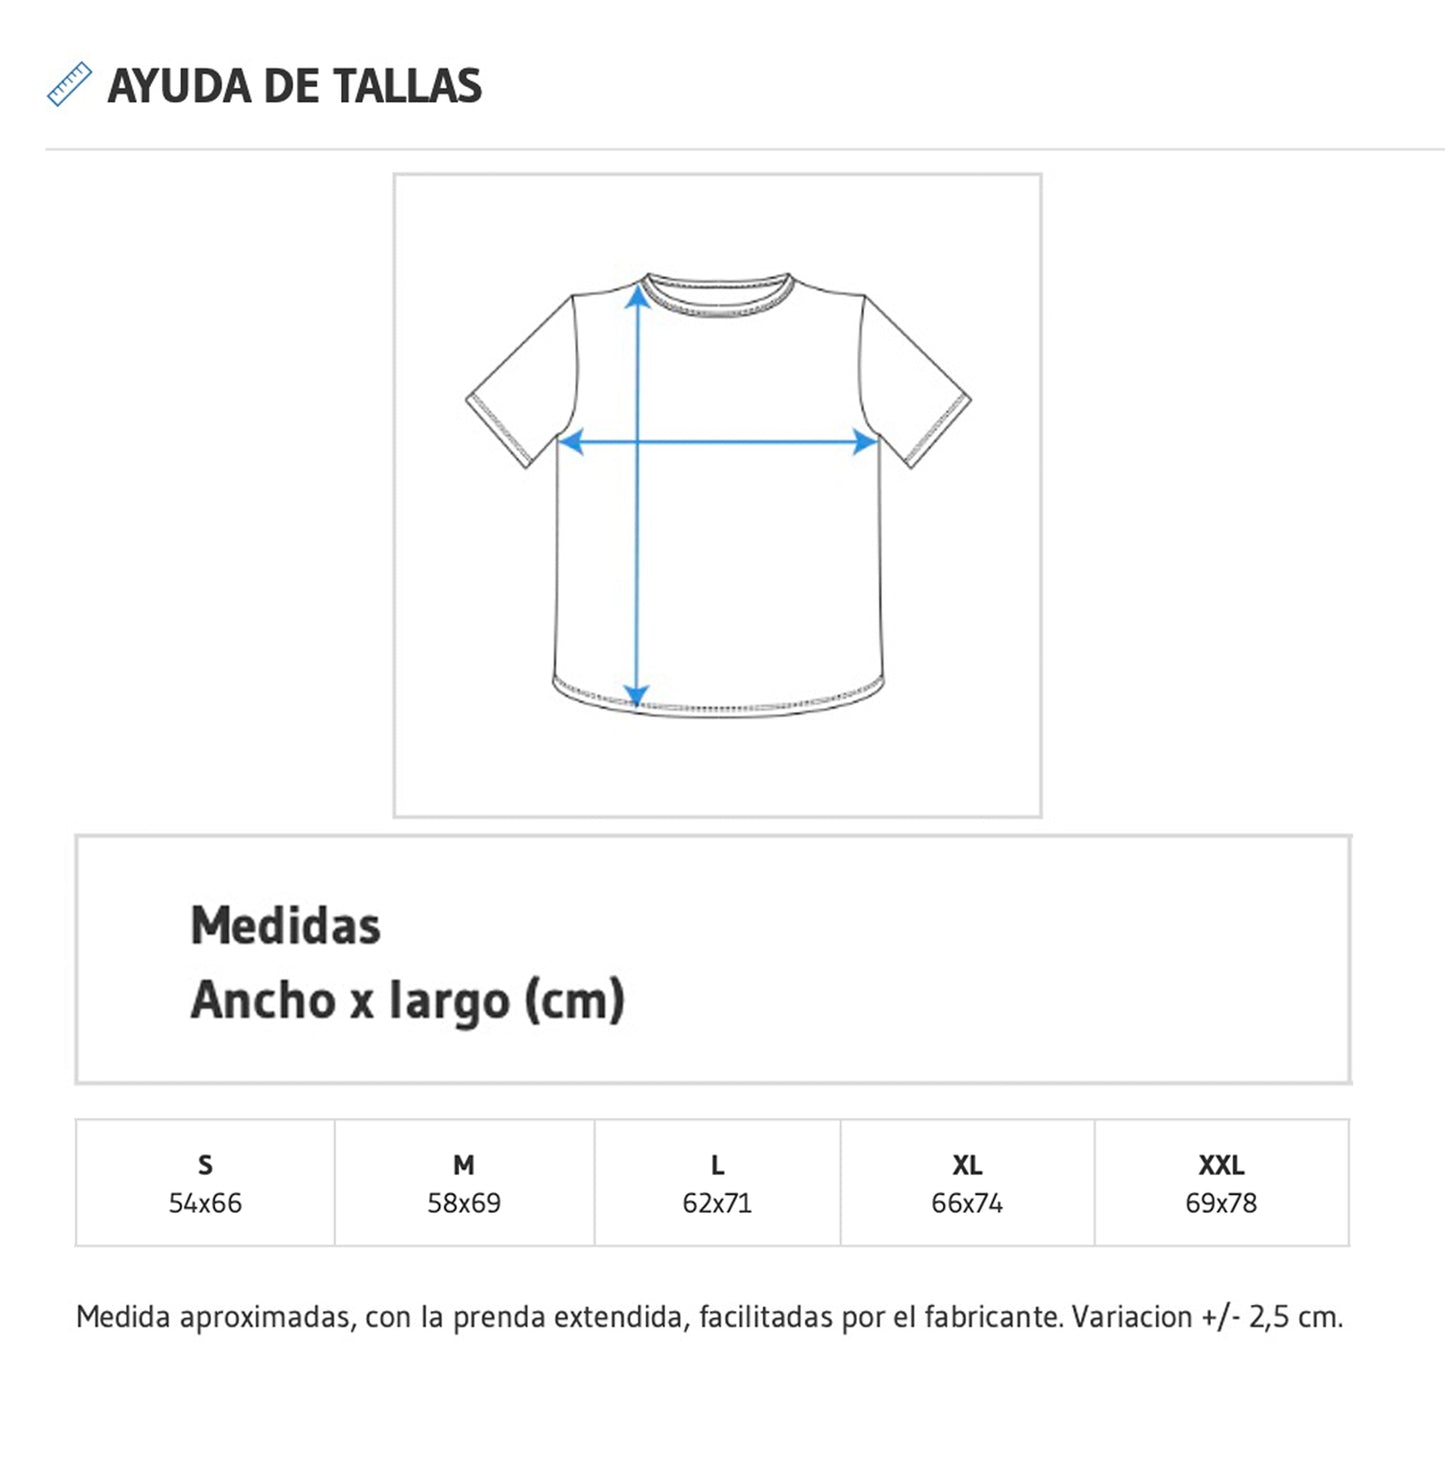 Col.0.0.Sudadera By Artist, For Artist.